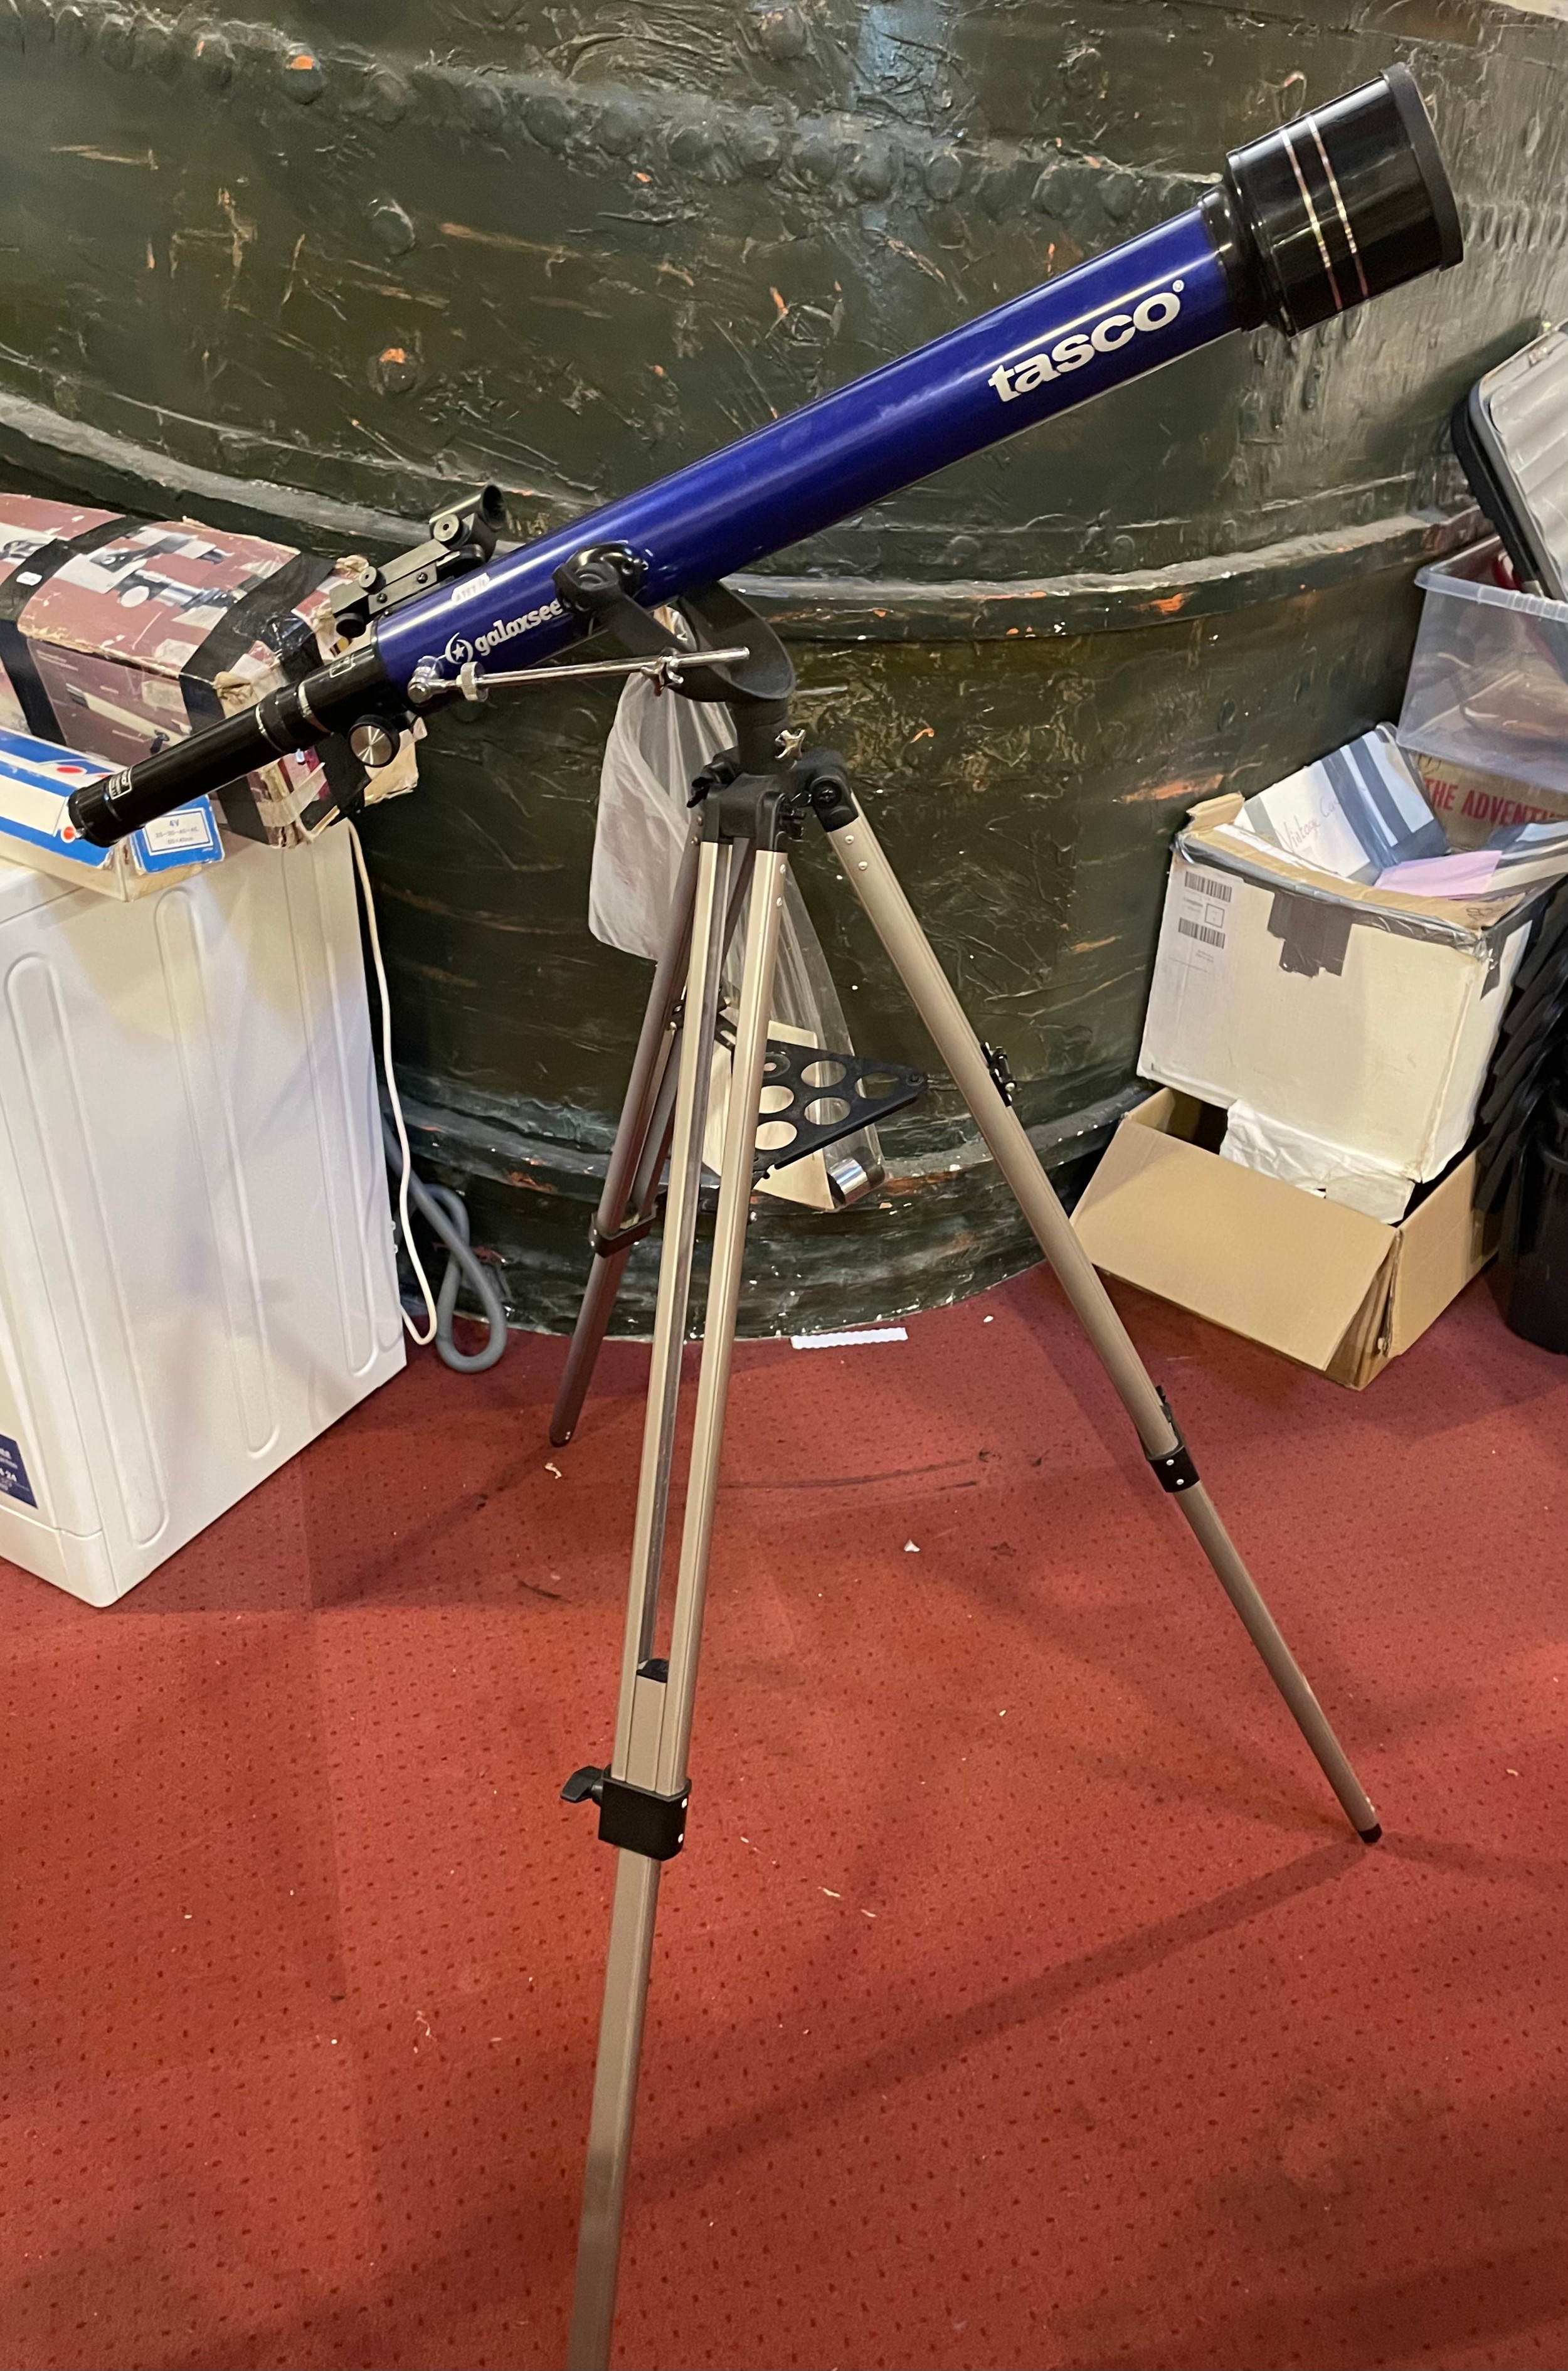 A modern Tasco 'Galaxsee' telescope on adjustable trypod, with accessories and instruction manual.